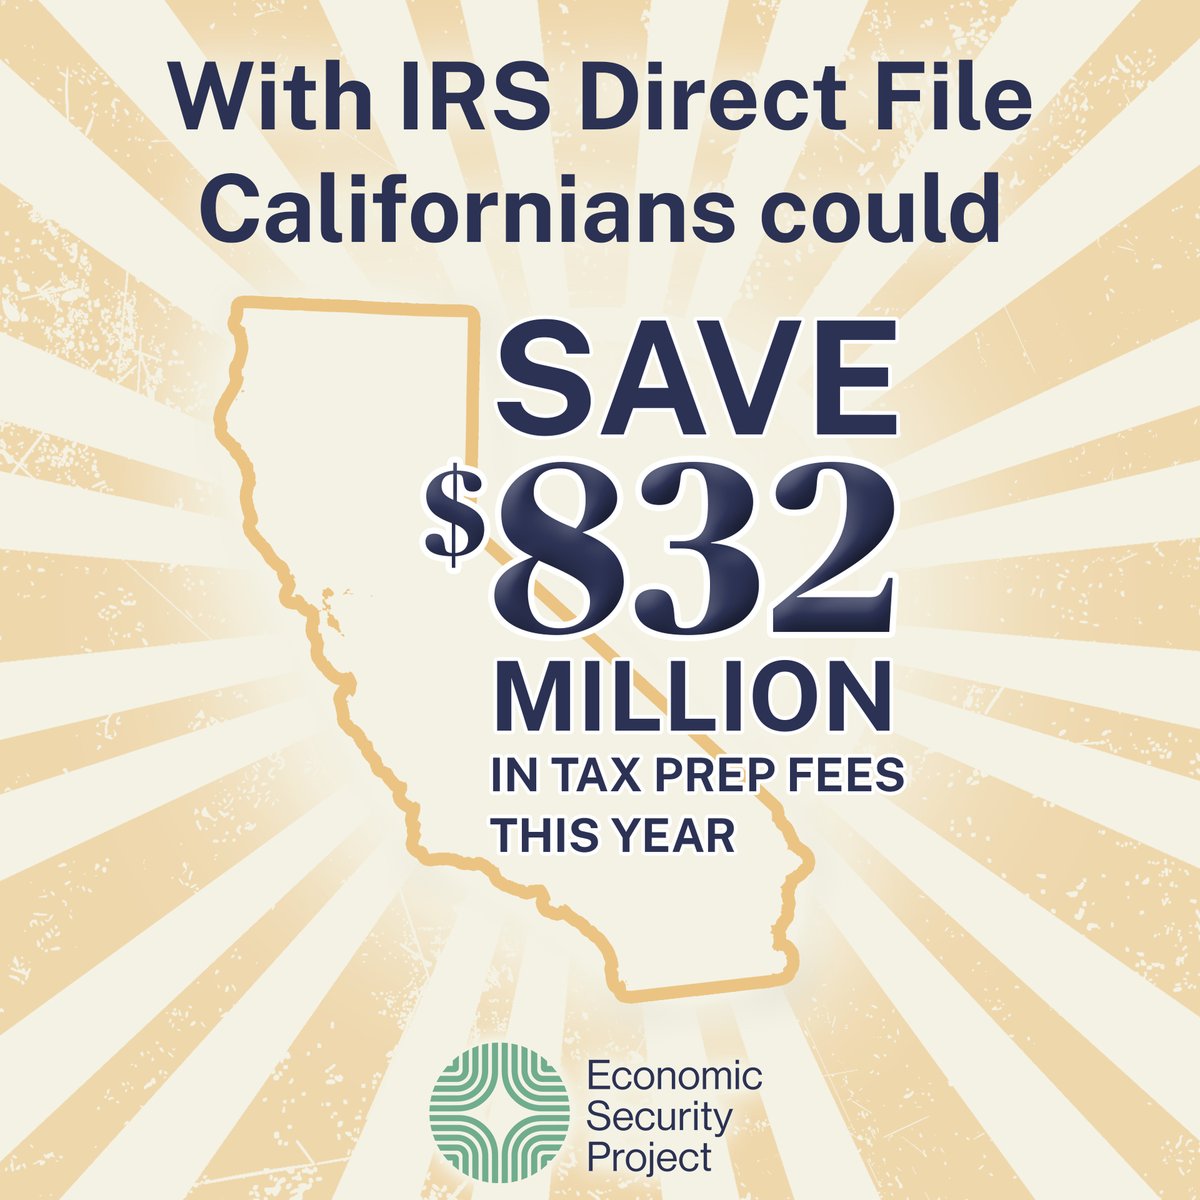 Every year, BILLIONS of tax credits go unclaimed! But thanks to IRS #DirectFile, a new online filing tool, #CA35 families have a FREE and simple way to get the $ they deserve this tax season!

Claim your return at directfile.irs.gov